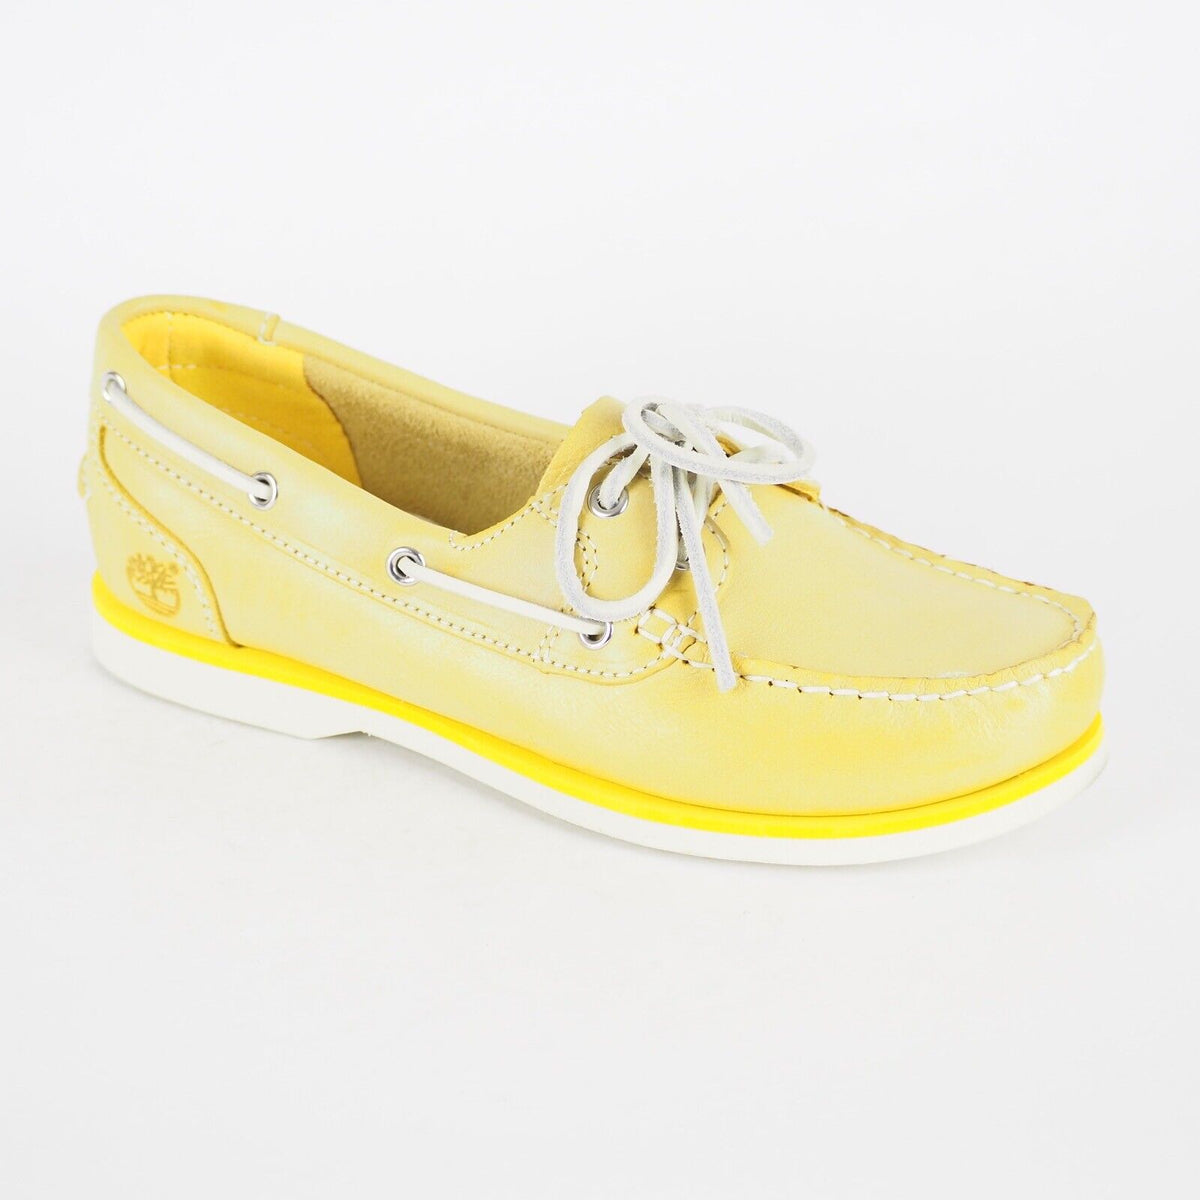 Womens Timberland Classic 2 Eye Unlined A14QA Yellow Leather Boat Shoes